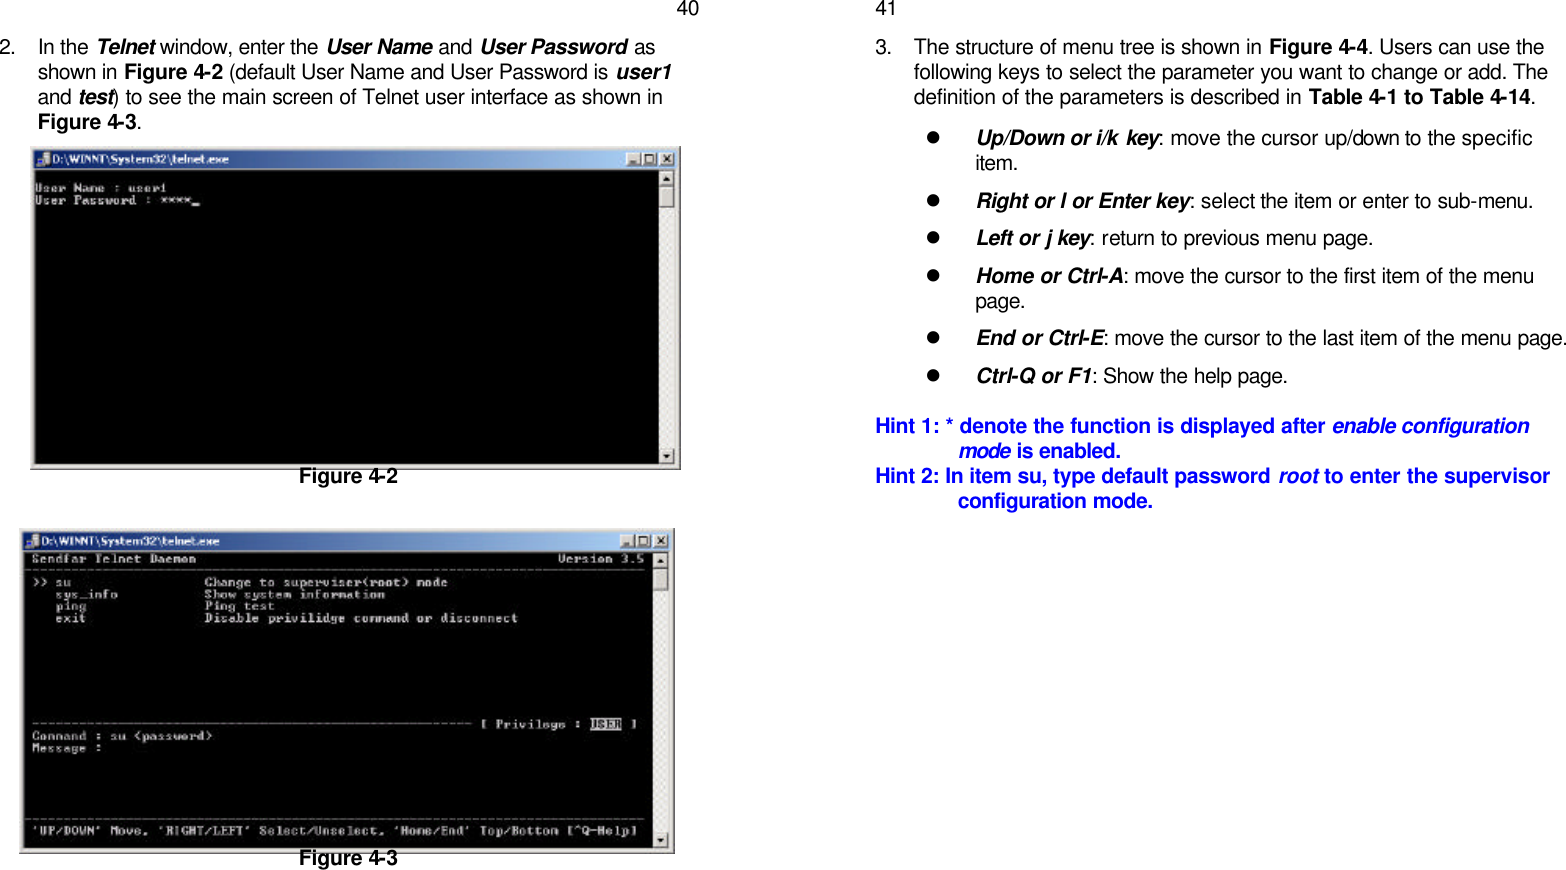   402. In the Telnet window, enter the User Name and User Password as shown in Figure 4-2 (default User Name and User Password is user1 and test) to see the main screen of Telnet user interface as shown in Figure 4-3.           Figure 4-2            Figure 4-3      413. The structure of menu tree is shown in Figure 4-4. Users can use the following keys to select the parameter you want to change or add. The definition of the parameters is described in Table 4-1 to Table 4-14. l Up/Down or i/k key: move the cursor up/down to the specific item. l Right or l or Enter key: select the item or enter to sub-menu. l Left or j key: return to previous menu page. l Home or Ctrl-A: move the cursor to the first item of the menu page. l End or Ctrl-E: move the cursor to the last item of the menu page. l Ctrl-Q or F1: Show the help page.  Hint 1: * denote the function is displayed after enable configuration mode is enabled. Hint 2: In item su, type default password root to enter the supervisor configuration mode.    